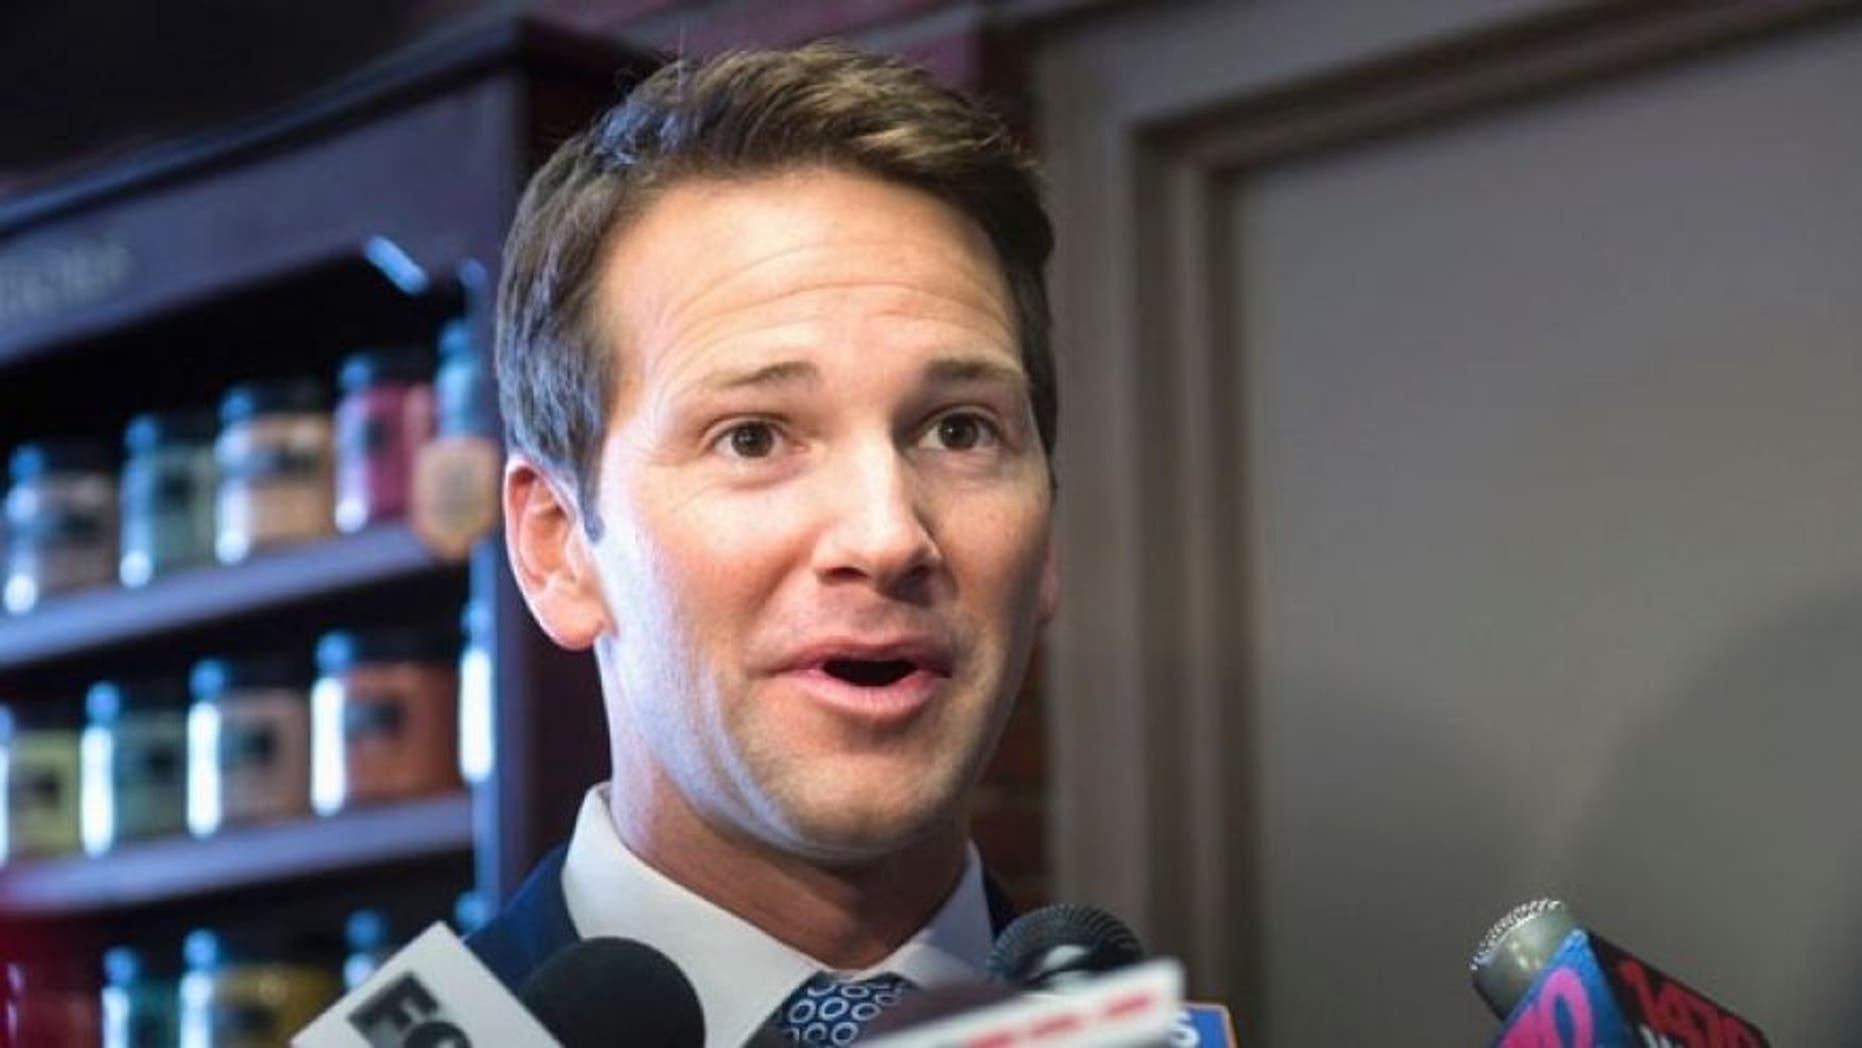 Former Rep Aaron Schock Ordered To Provide Records In Probe Fox News 1577